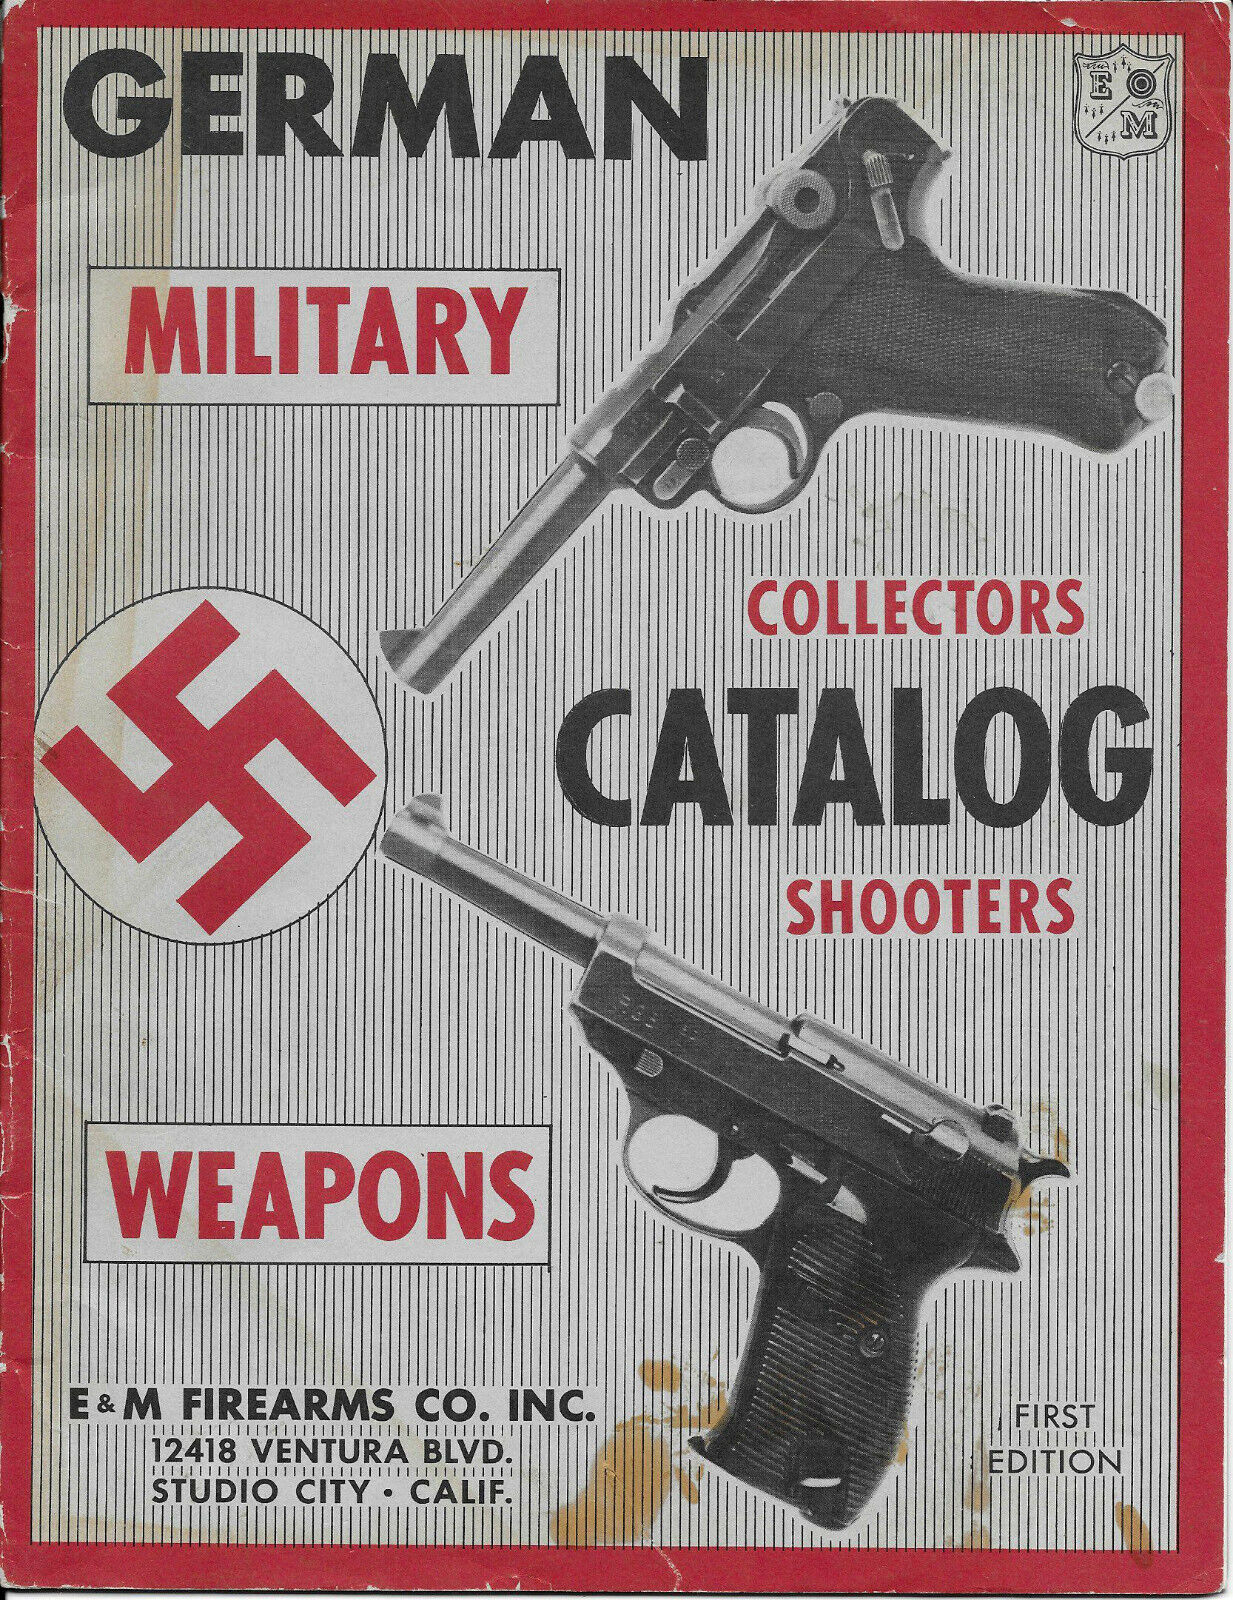 German Military Weapons Collectors Catalog E & M Firearms Co. First Edition